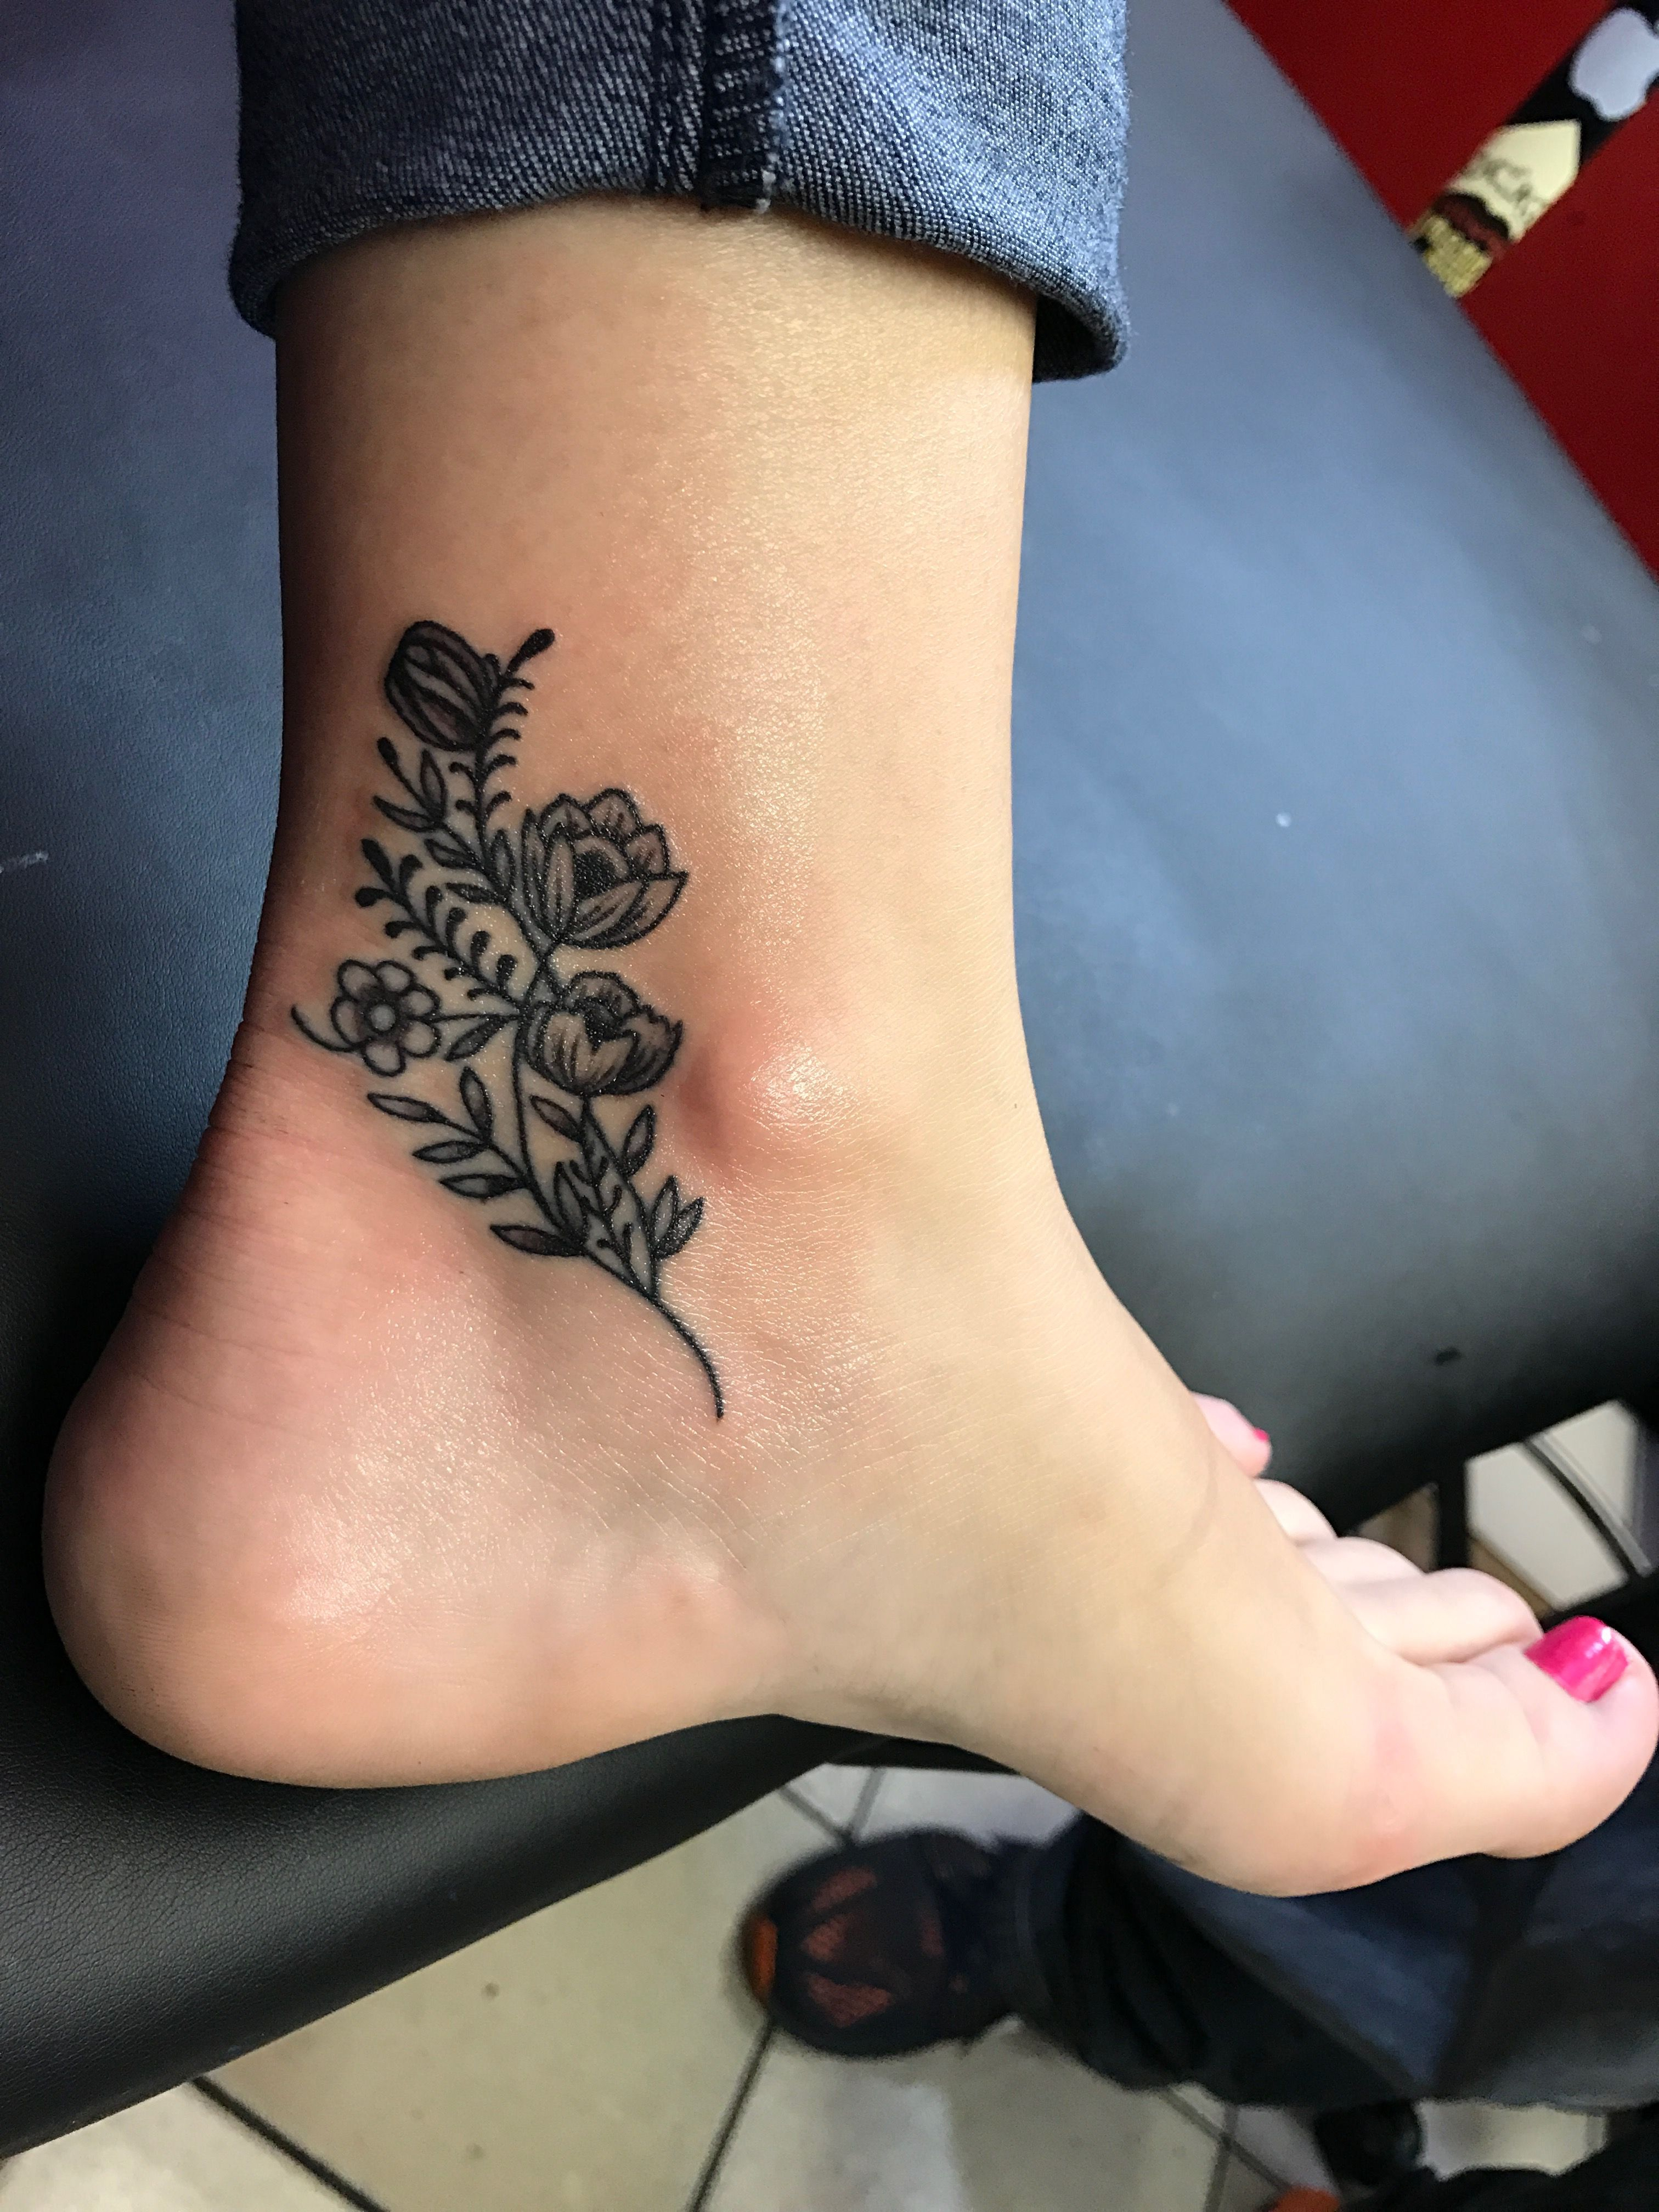 Ankle Flower Tattoo This Is The One Change The Little Daisy To intended for measurements 3024 X 4032